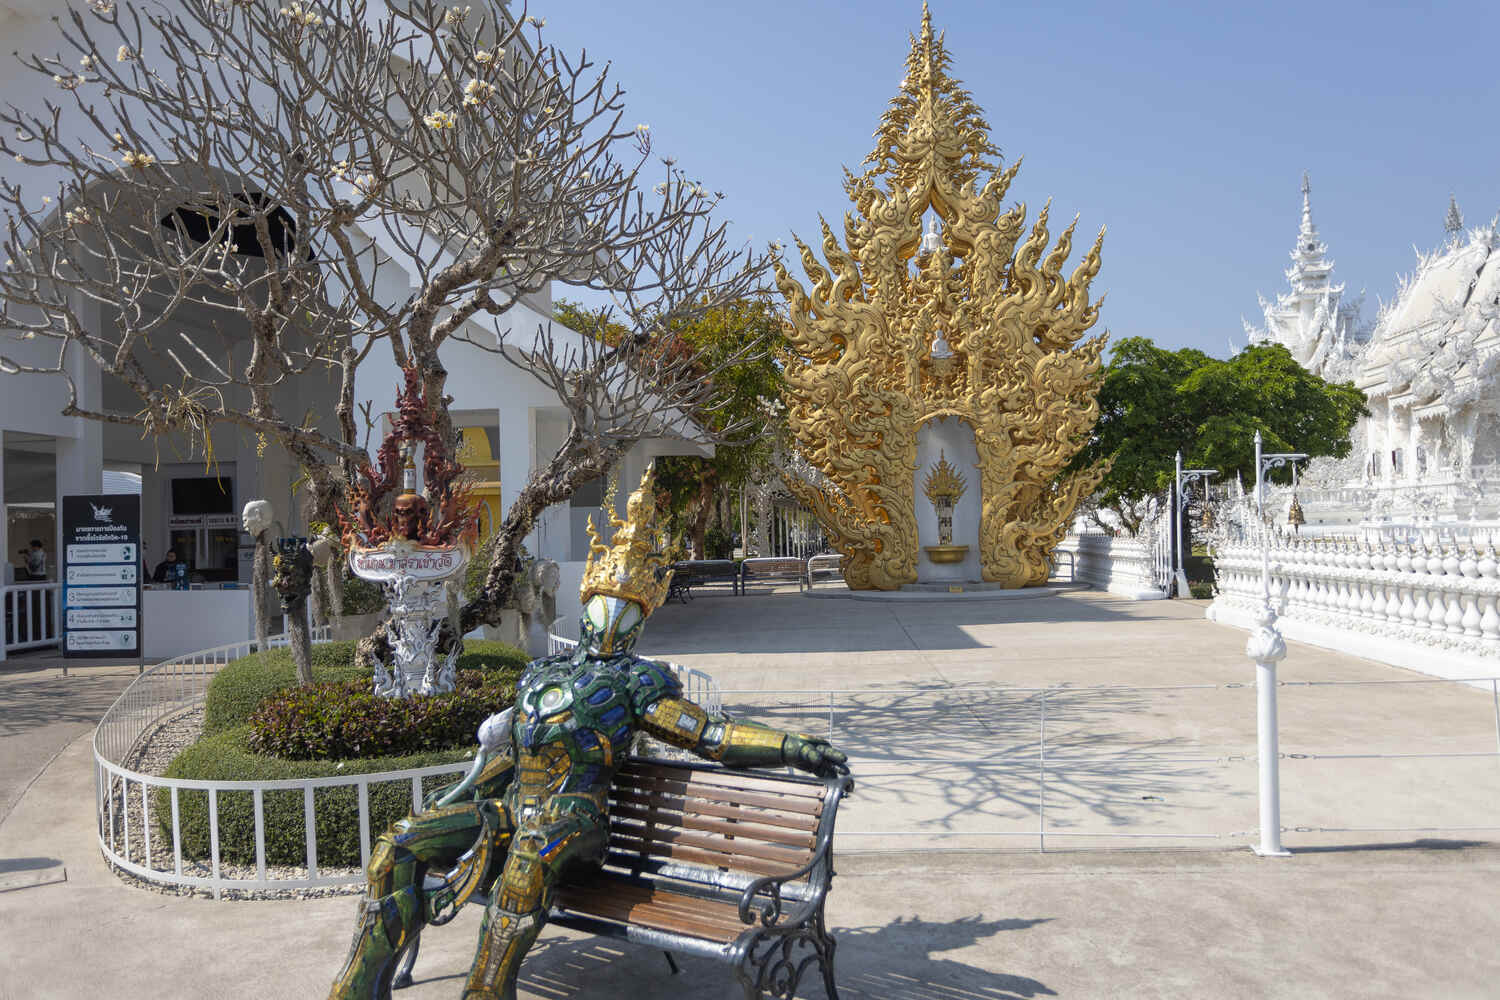 More intriguing details at the Chiang Rai white temple